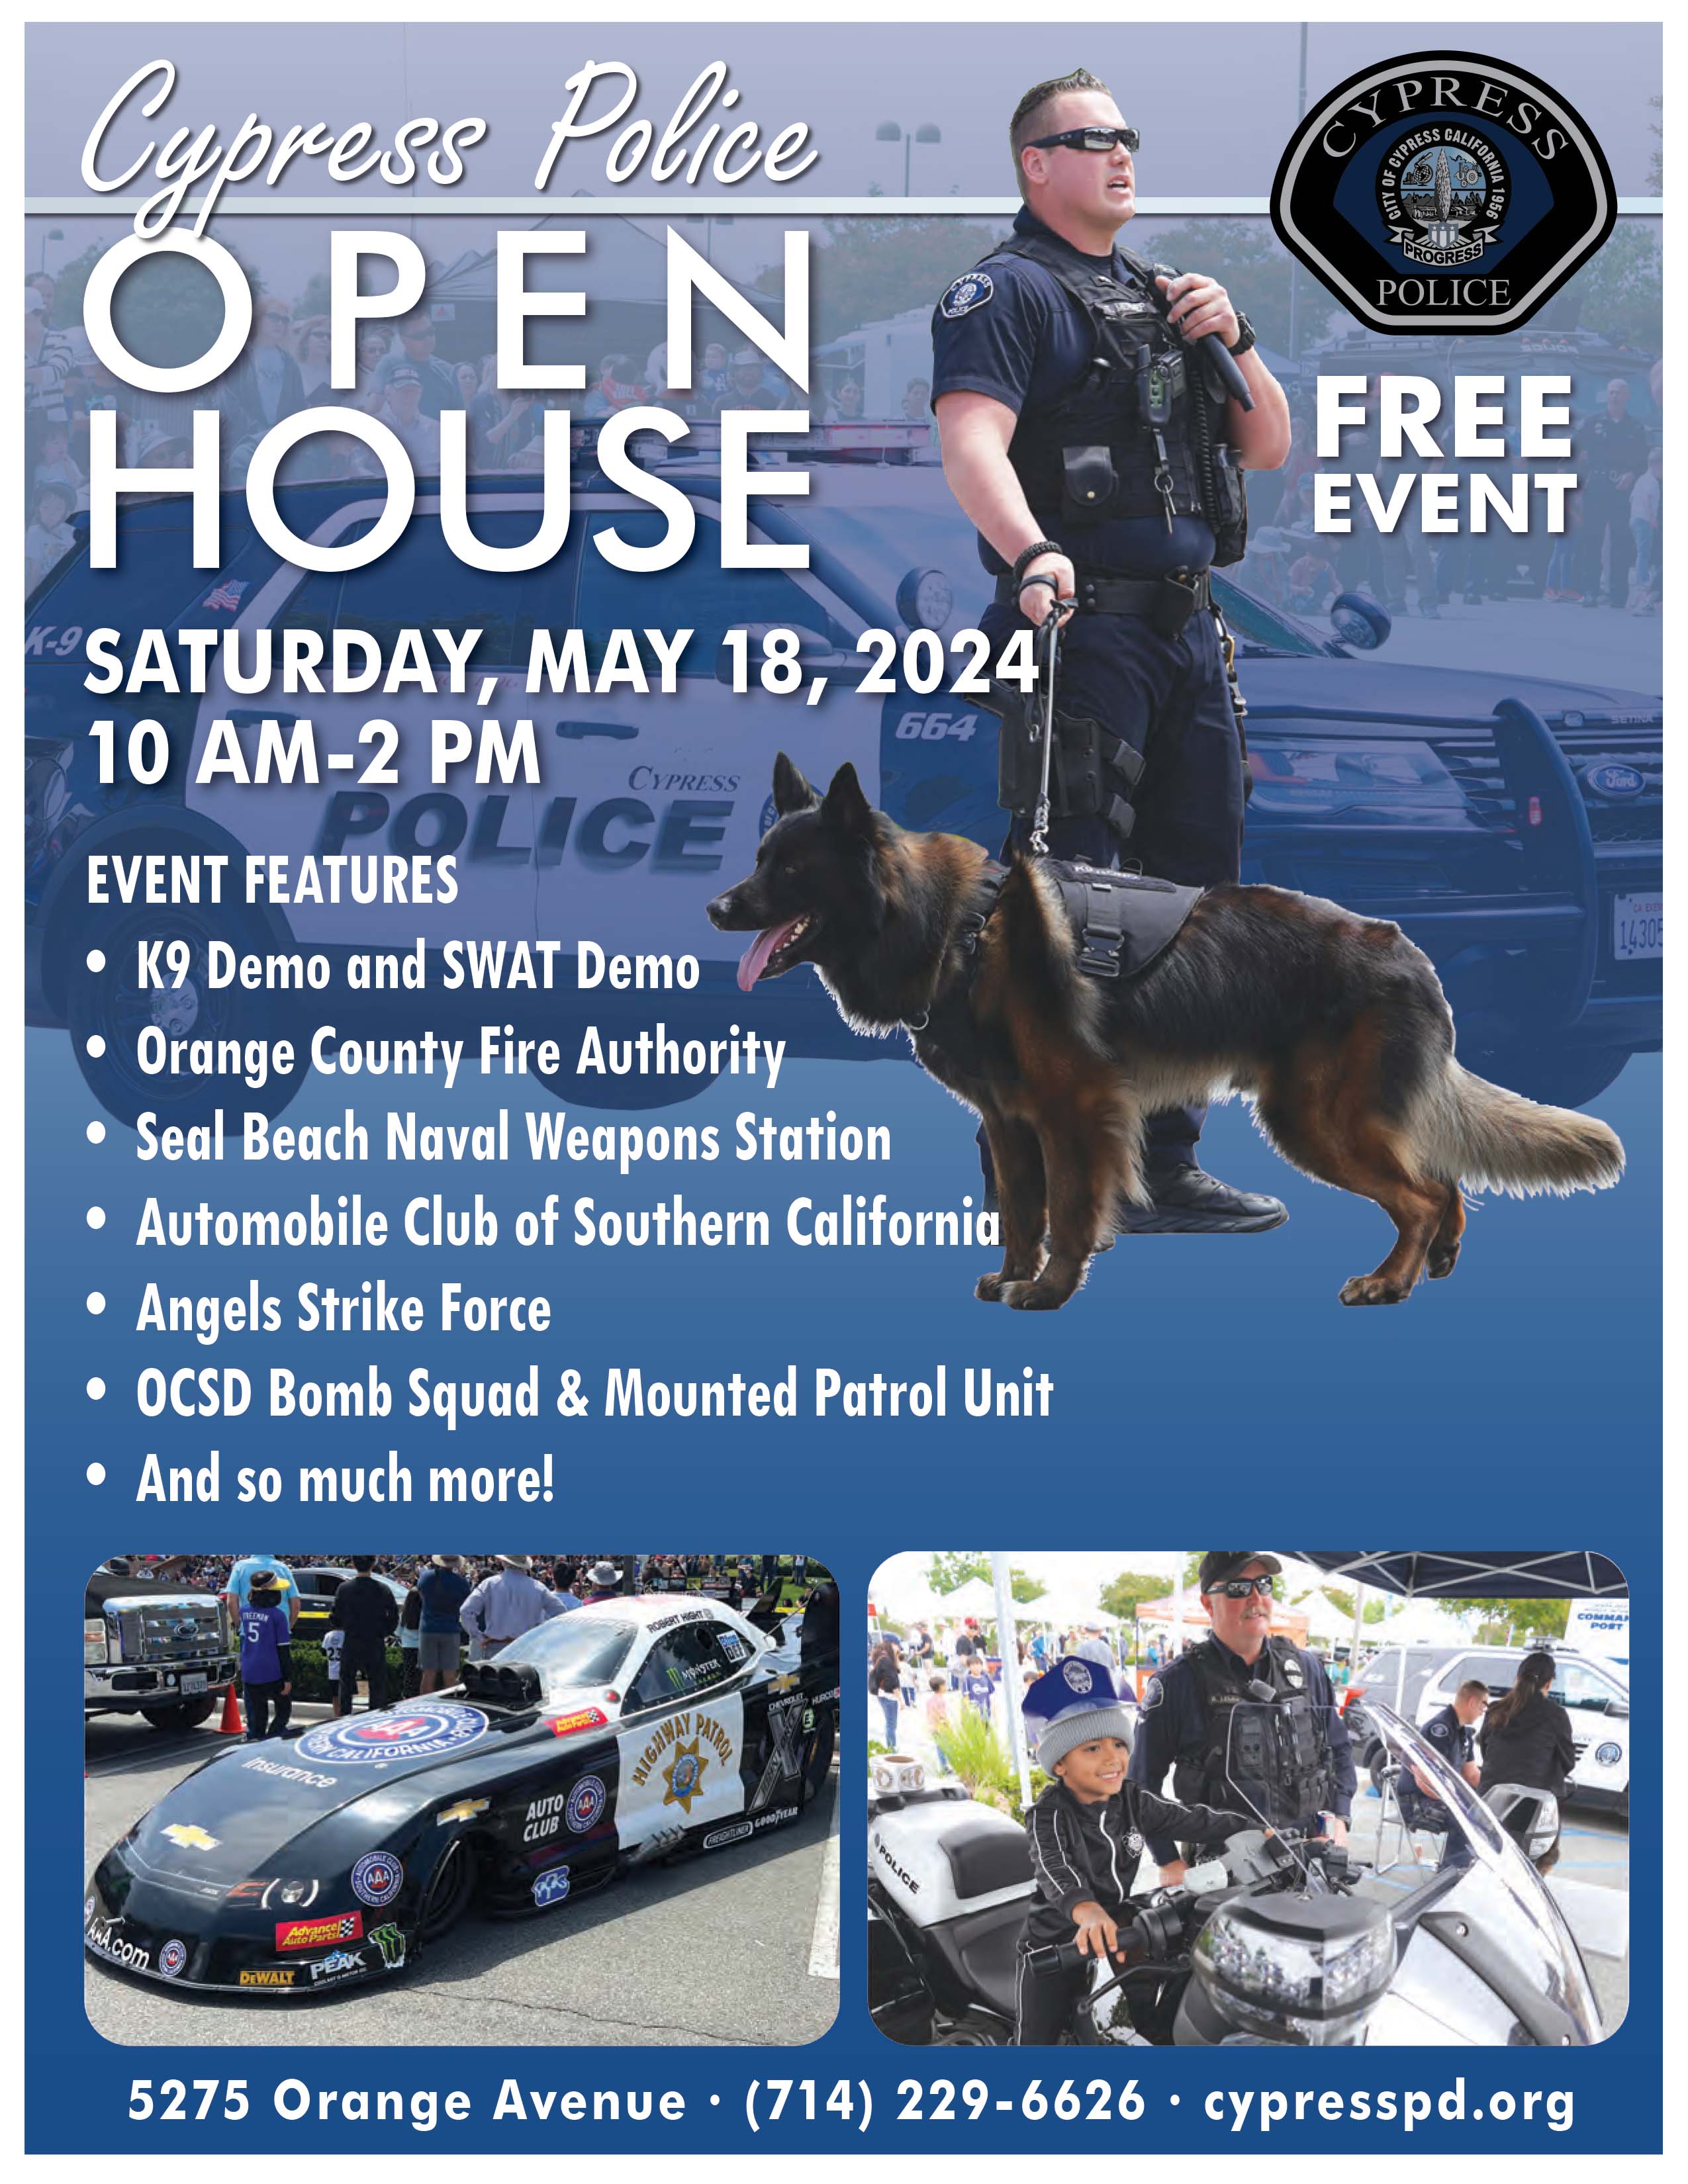 Cypress Police Department Open House